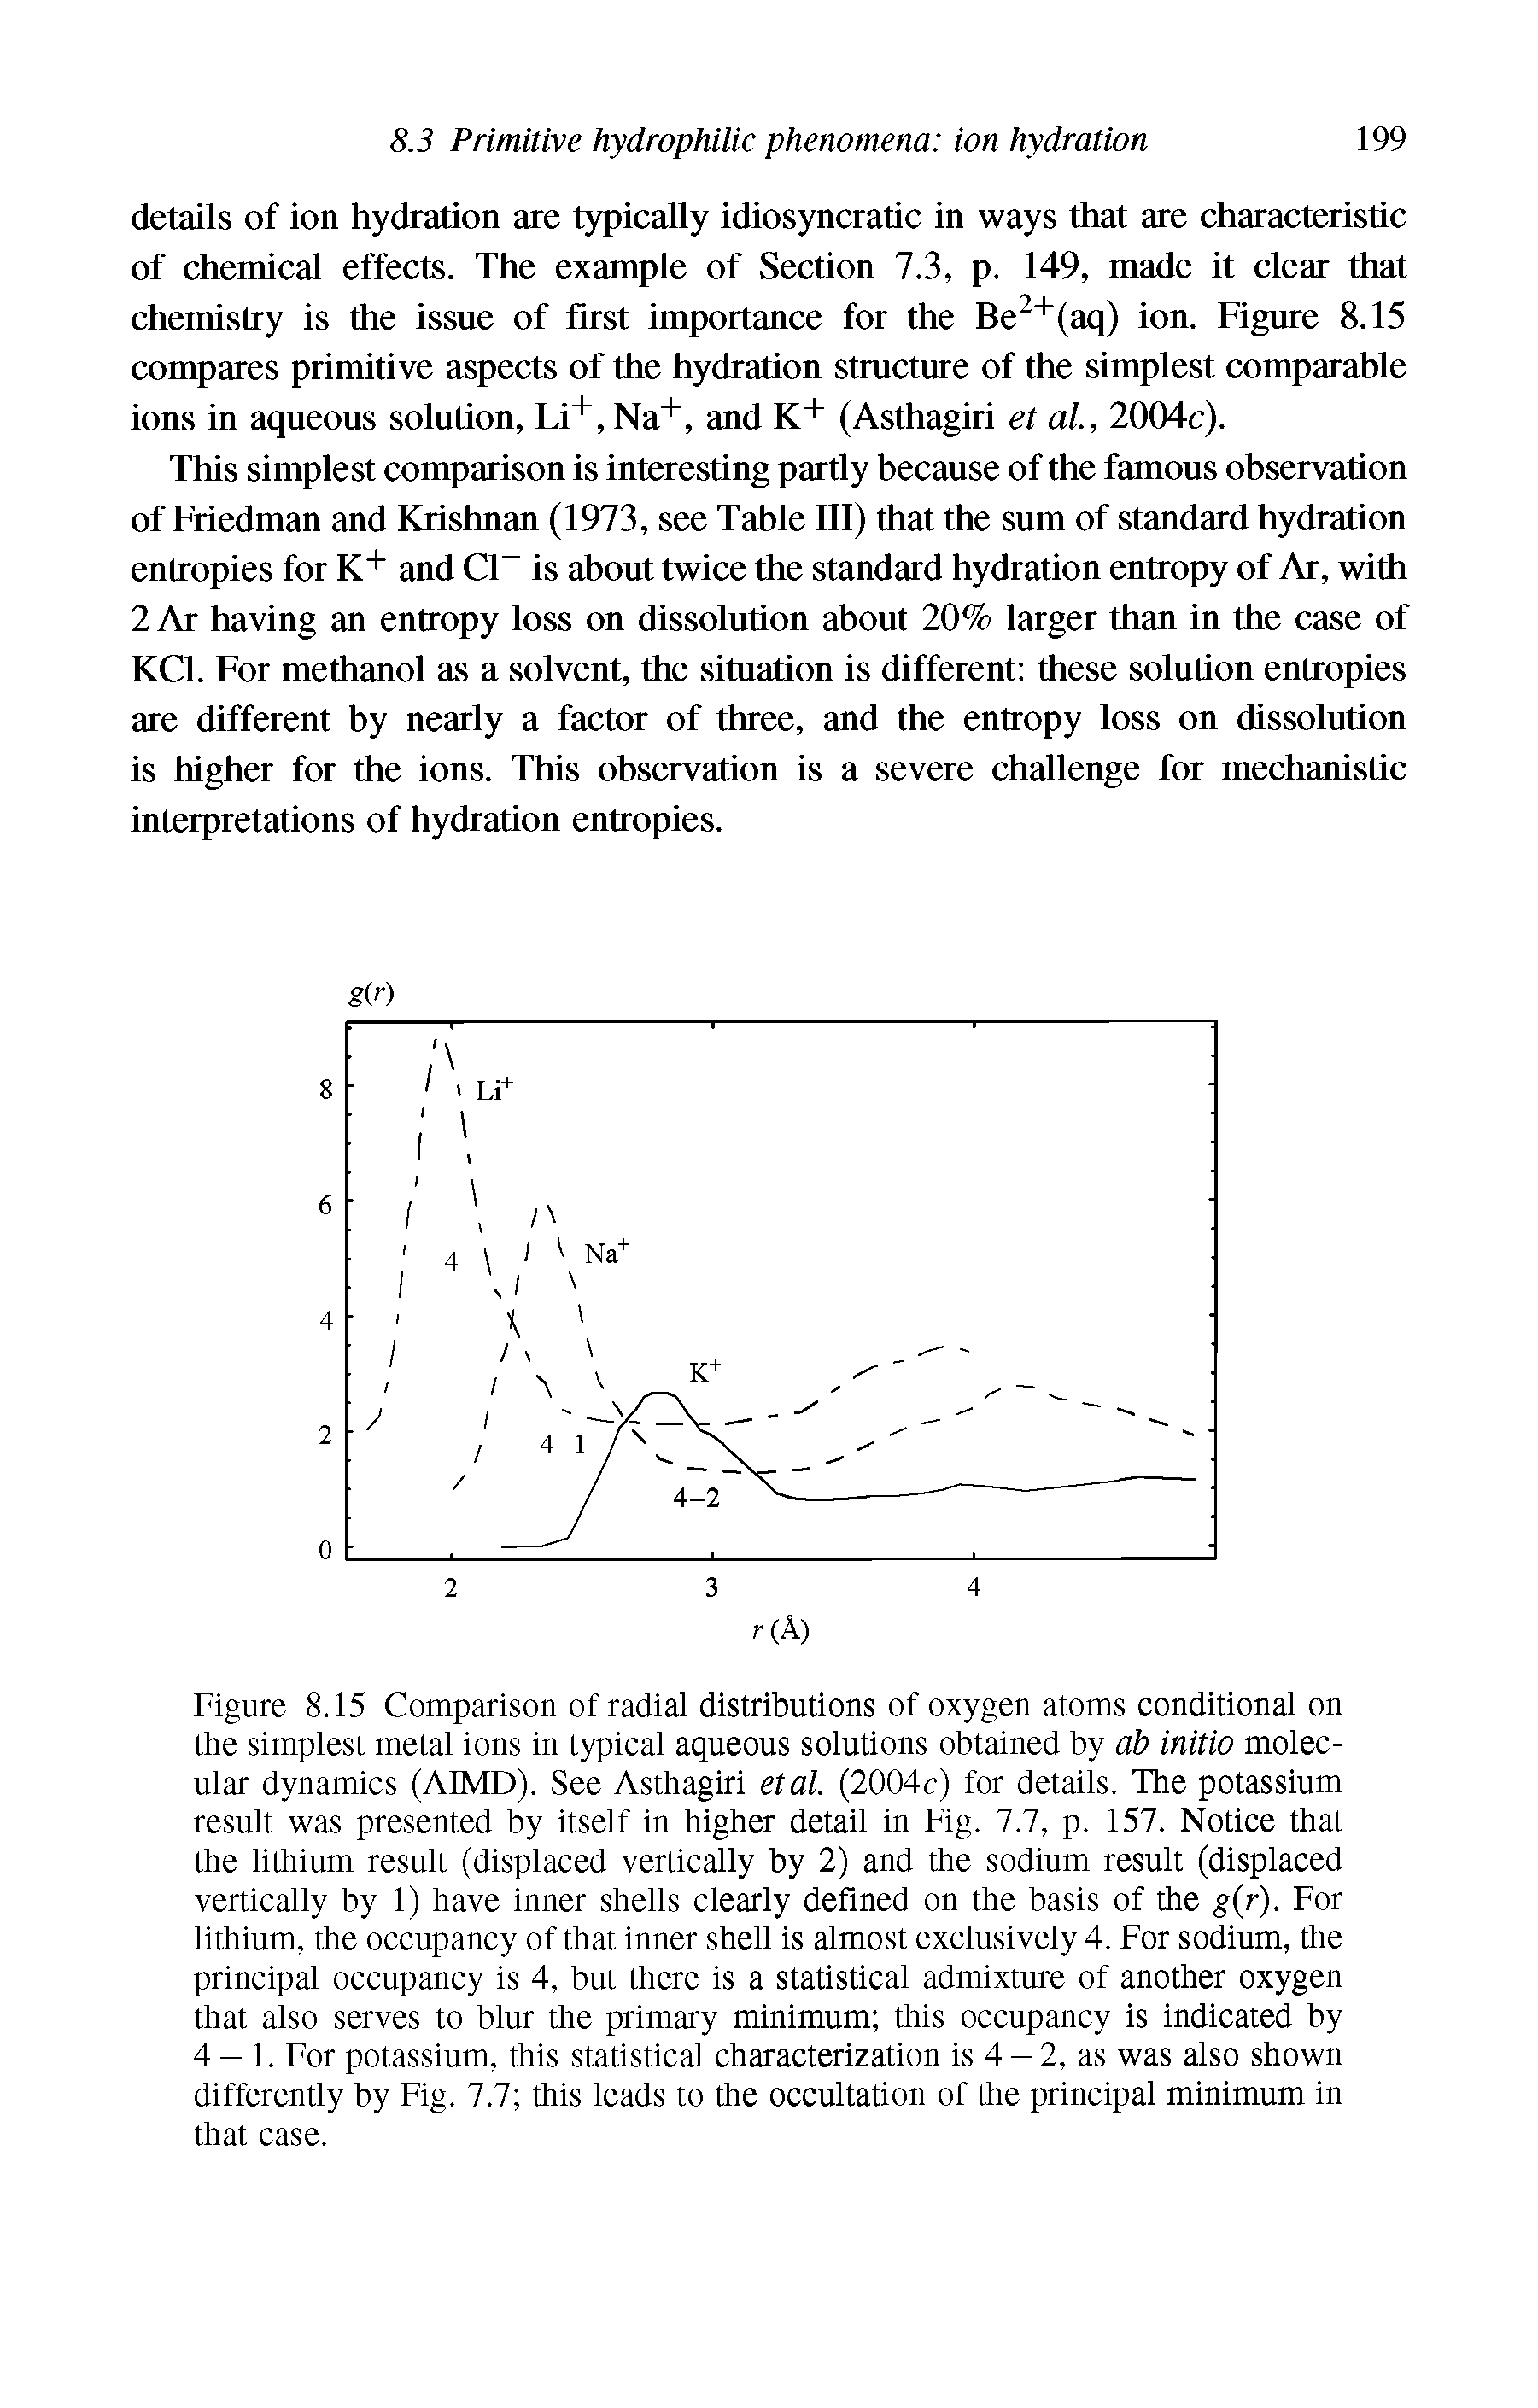 Figure 8.15 Comparison of radial distributions of oxygen atoms conditional on the simplest metal ions in typical aqueous solutions obtained by ab initio molecular dynamics (AIMD). See Asthagiri etal. (2004c) for details. The potassium result was presented by itself in higher detail in Fig. 7.7, p. 157. Notice that the lithium result (displaced vertically by 2) and the sodium result (displaced vertically by 1) have inner shells clearly defined on the basis of the g r). For lithium, the occupancy of that inner shell is almost exclusively 4. For sodium, the principal occupancy is 4, but there is a statistical admixture of another oxygen that also serves to blur the primary minimum this occupancy is indicated by 4-1. For potassium, this statistical characterization is 4 - 2, as was also shown differently by Fig. 7.7 this leads to the occultation of the principal minimum in that case.